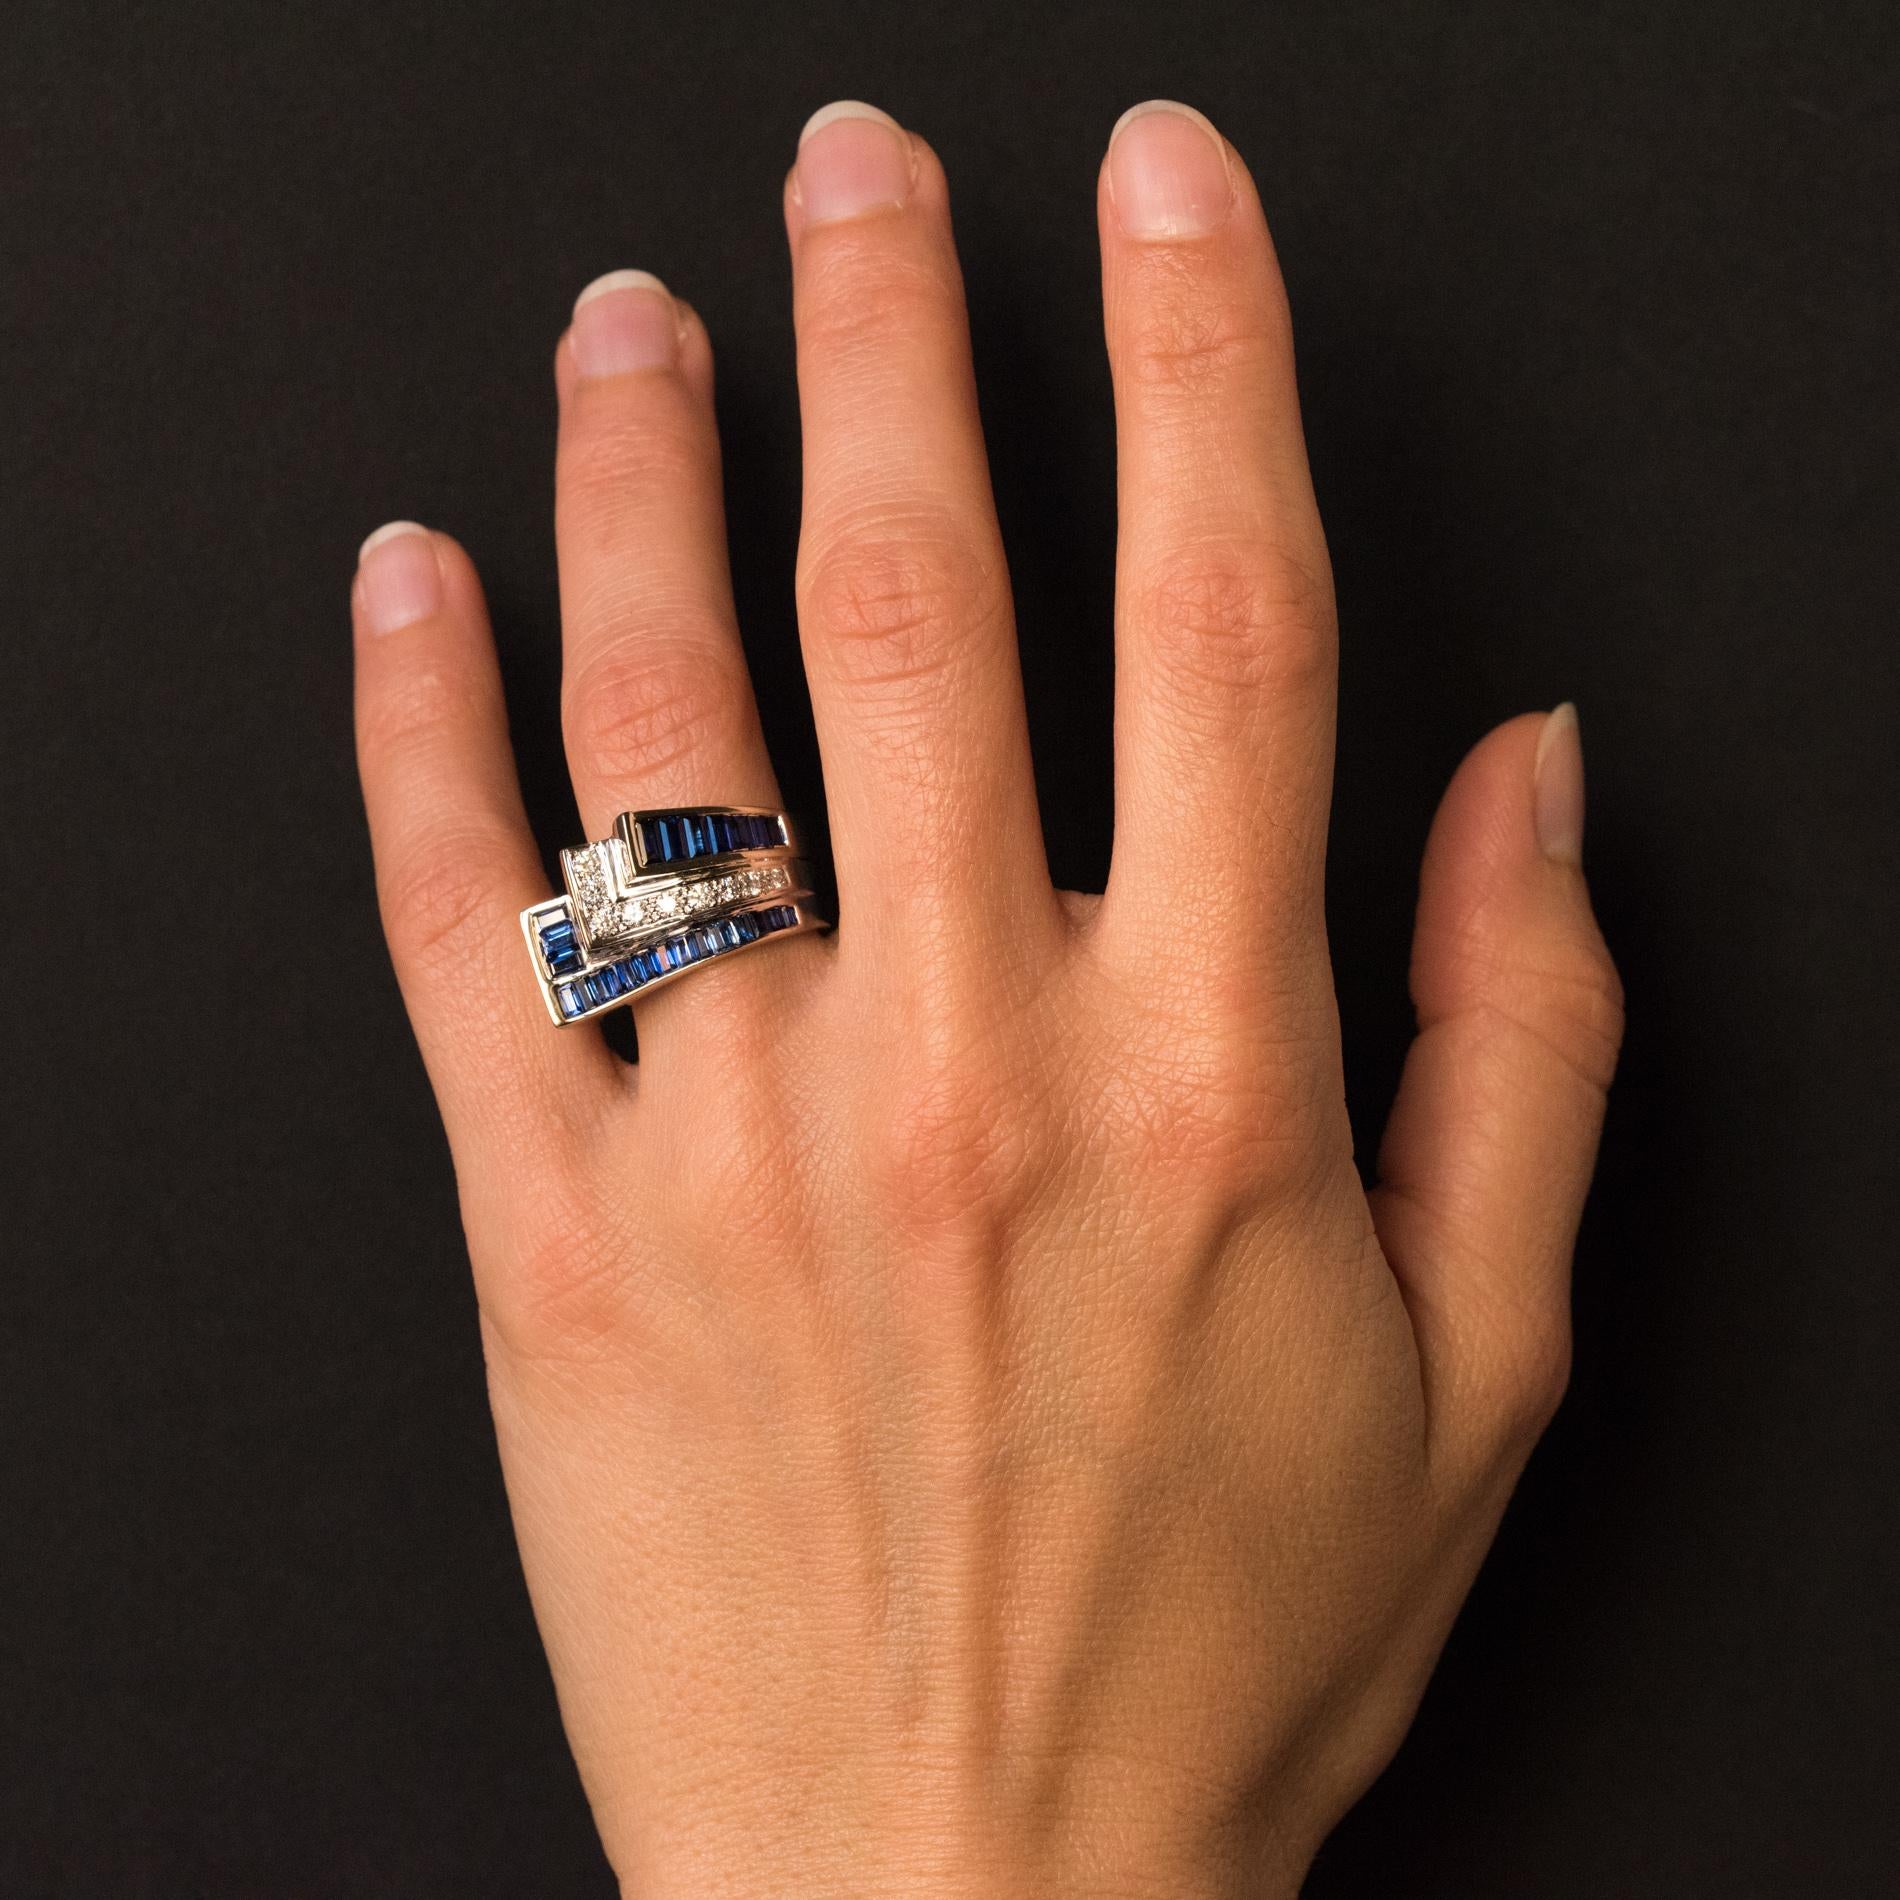 Ring in 18 karats white gold, eagle's head hallmark.
Asymmetric, this art deco ring is made up of 3 overlapping rectangular motifs, alternately set with calibrated blue sapphires, brilliant- cut diamonds and calibrated sapphires.
Total weight of